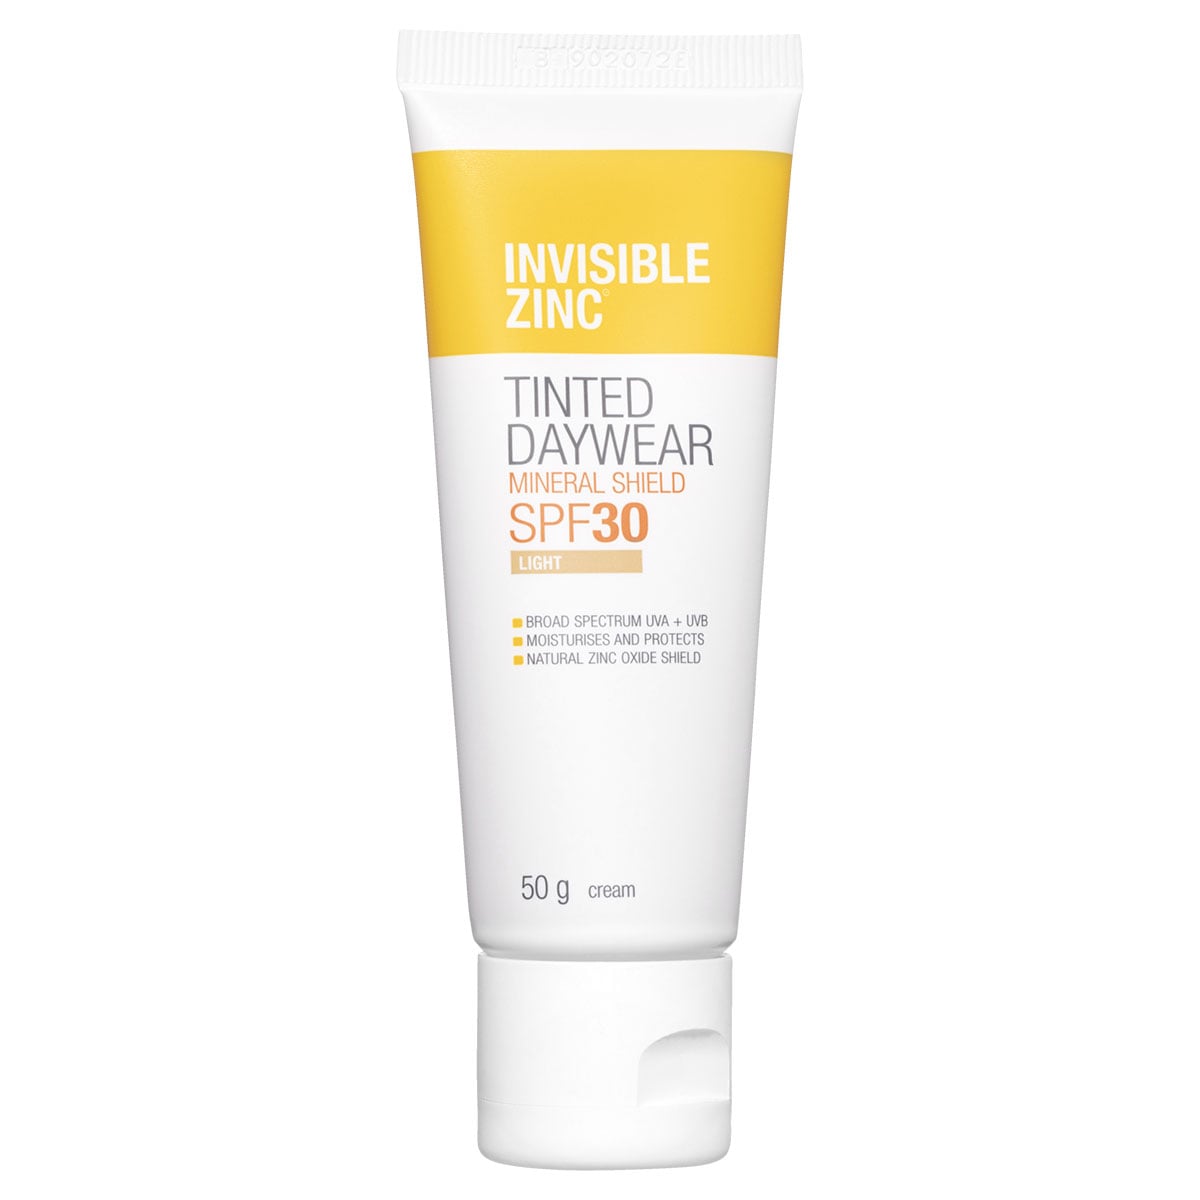 Invisible Zinc Tinted Day Wear Light SPF30+ 50g